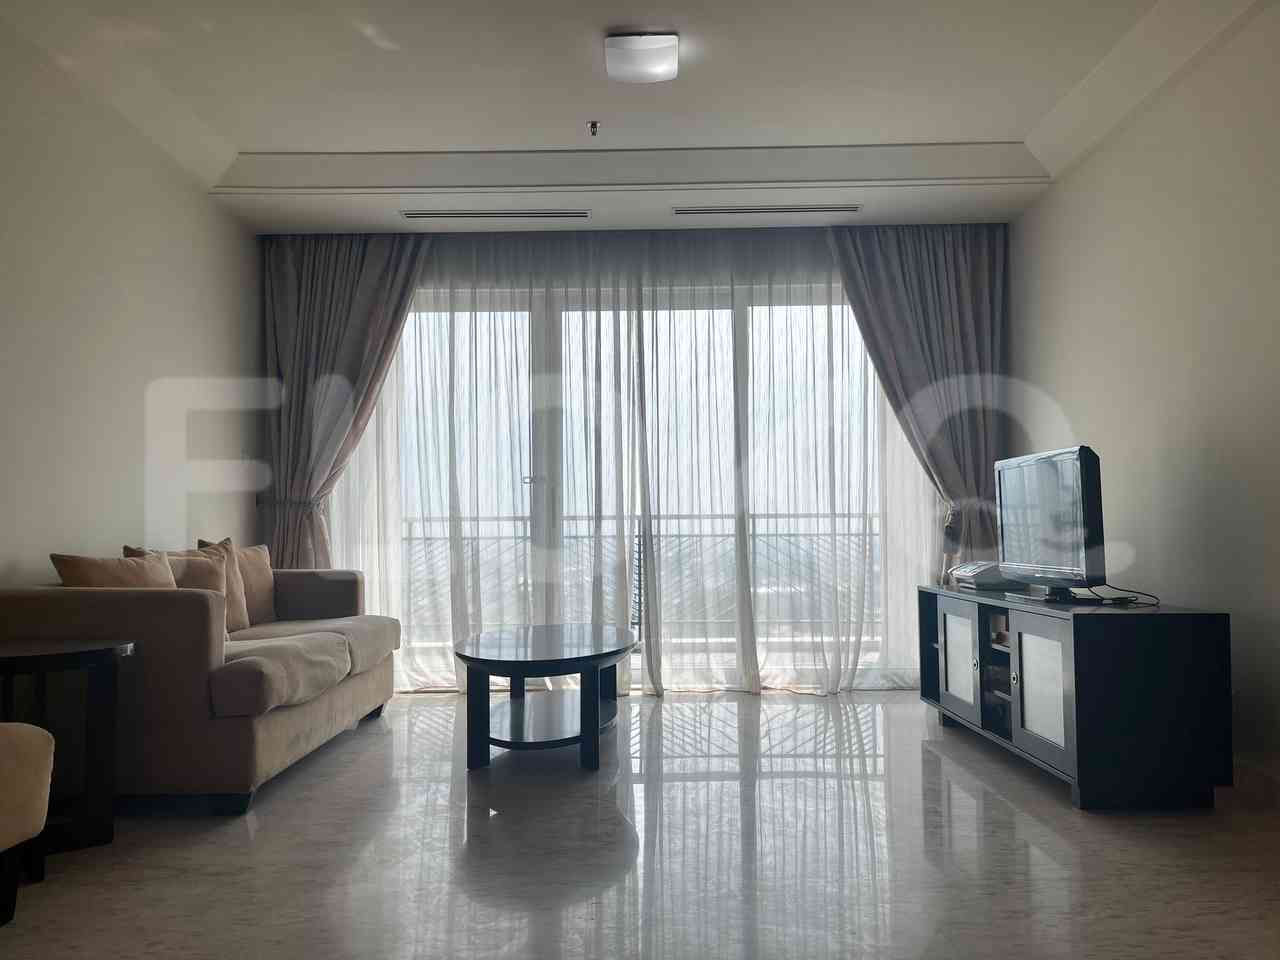 2 Bedroom on 9th Floor for Rent in Pakubuwono Residence - fgab86 1